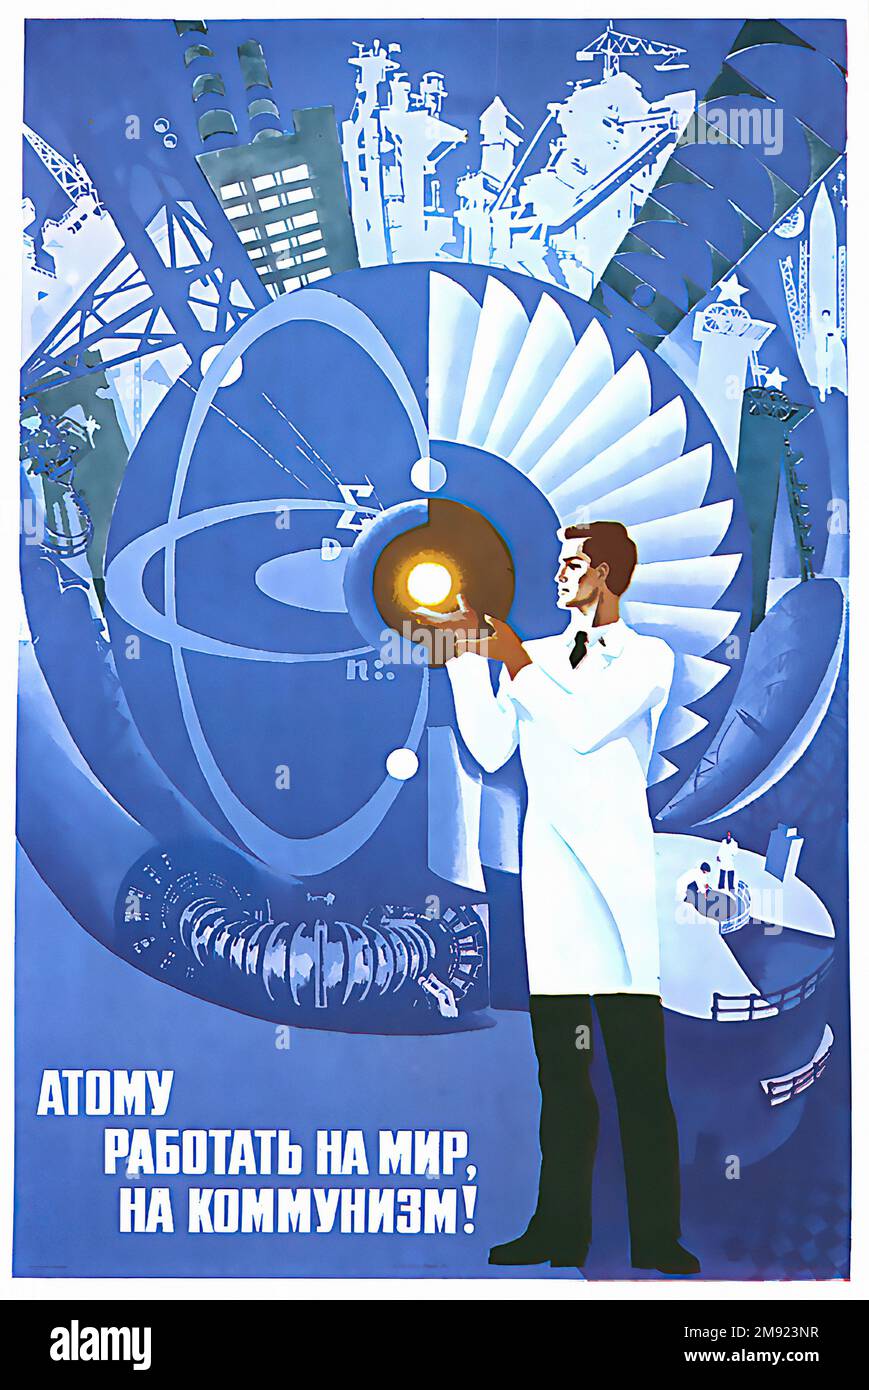 Atom Will Work For Peace, For Communism. (Translated from Russian) - Vintage USSR soviet propaganda poster Stock Photo